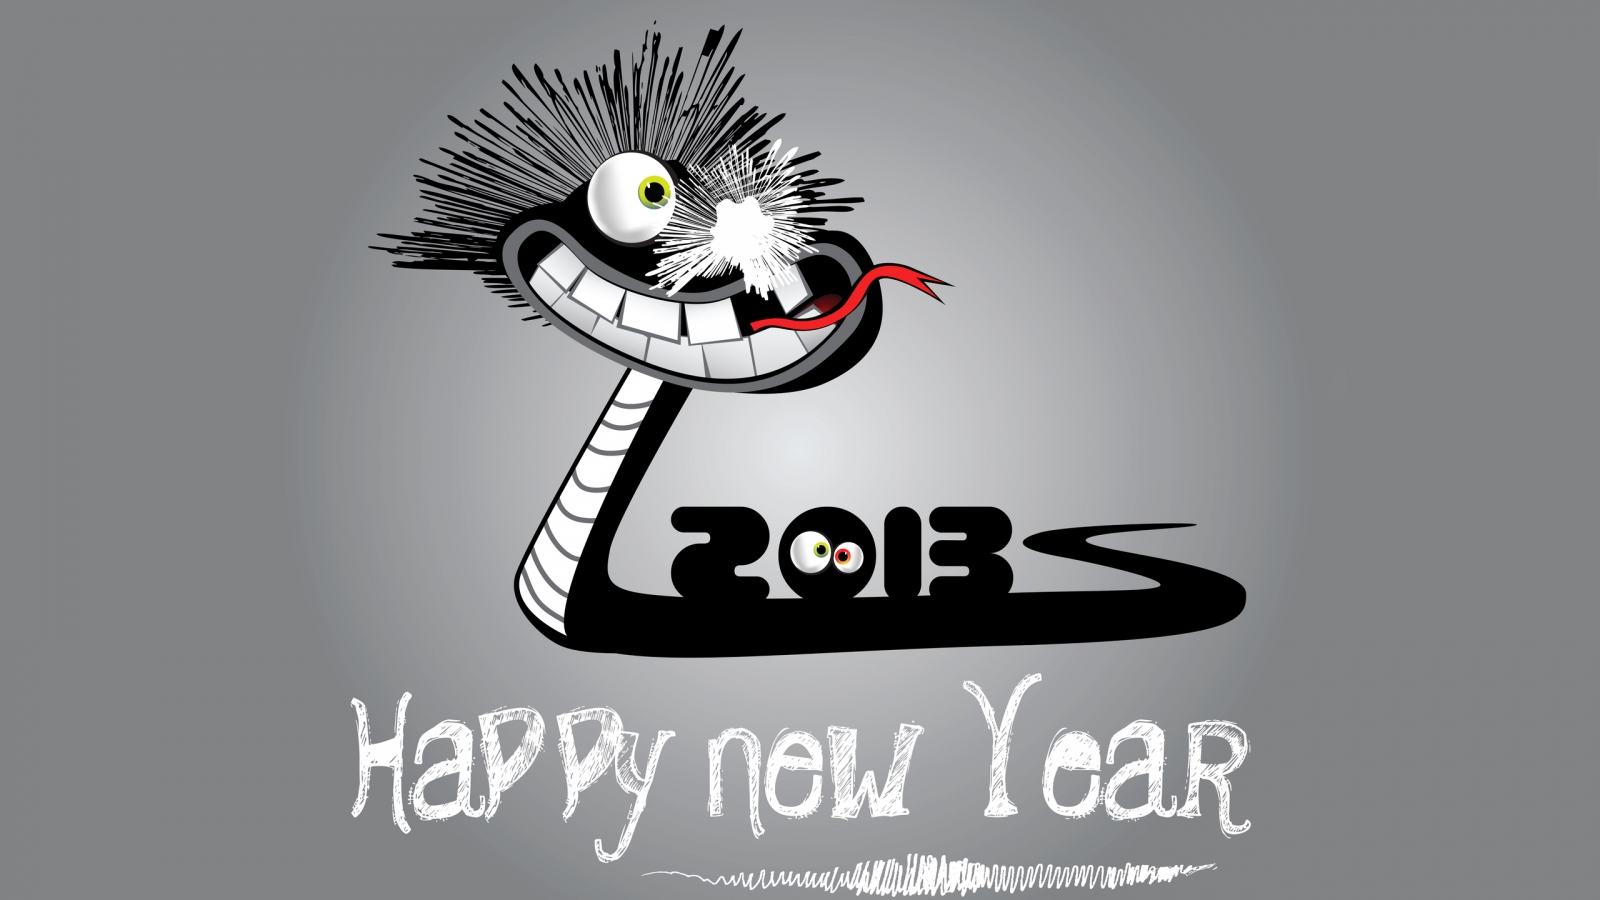 2013 Happy New Year for 1600 x 900 HDTV resolution